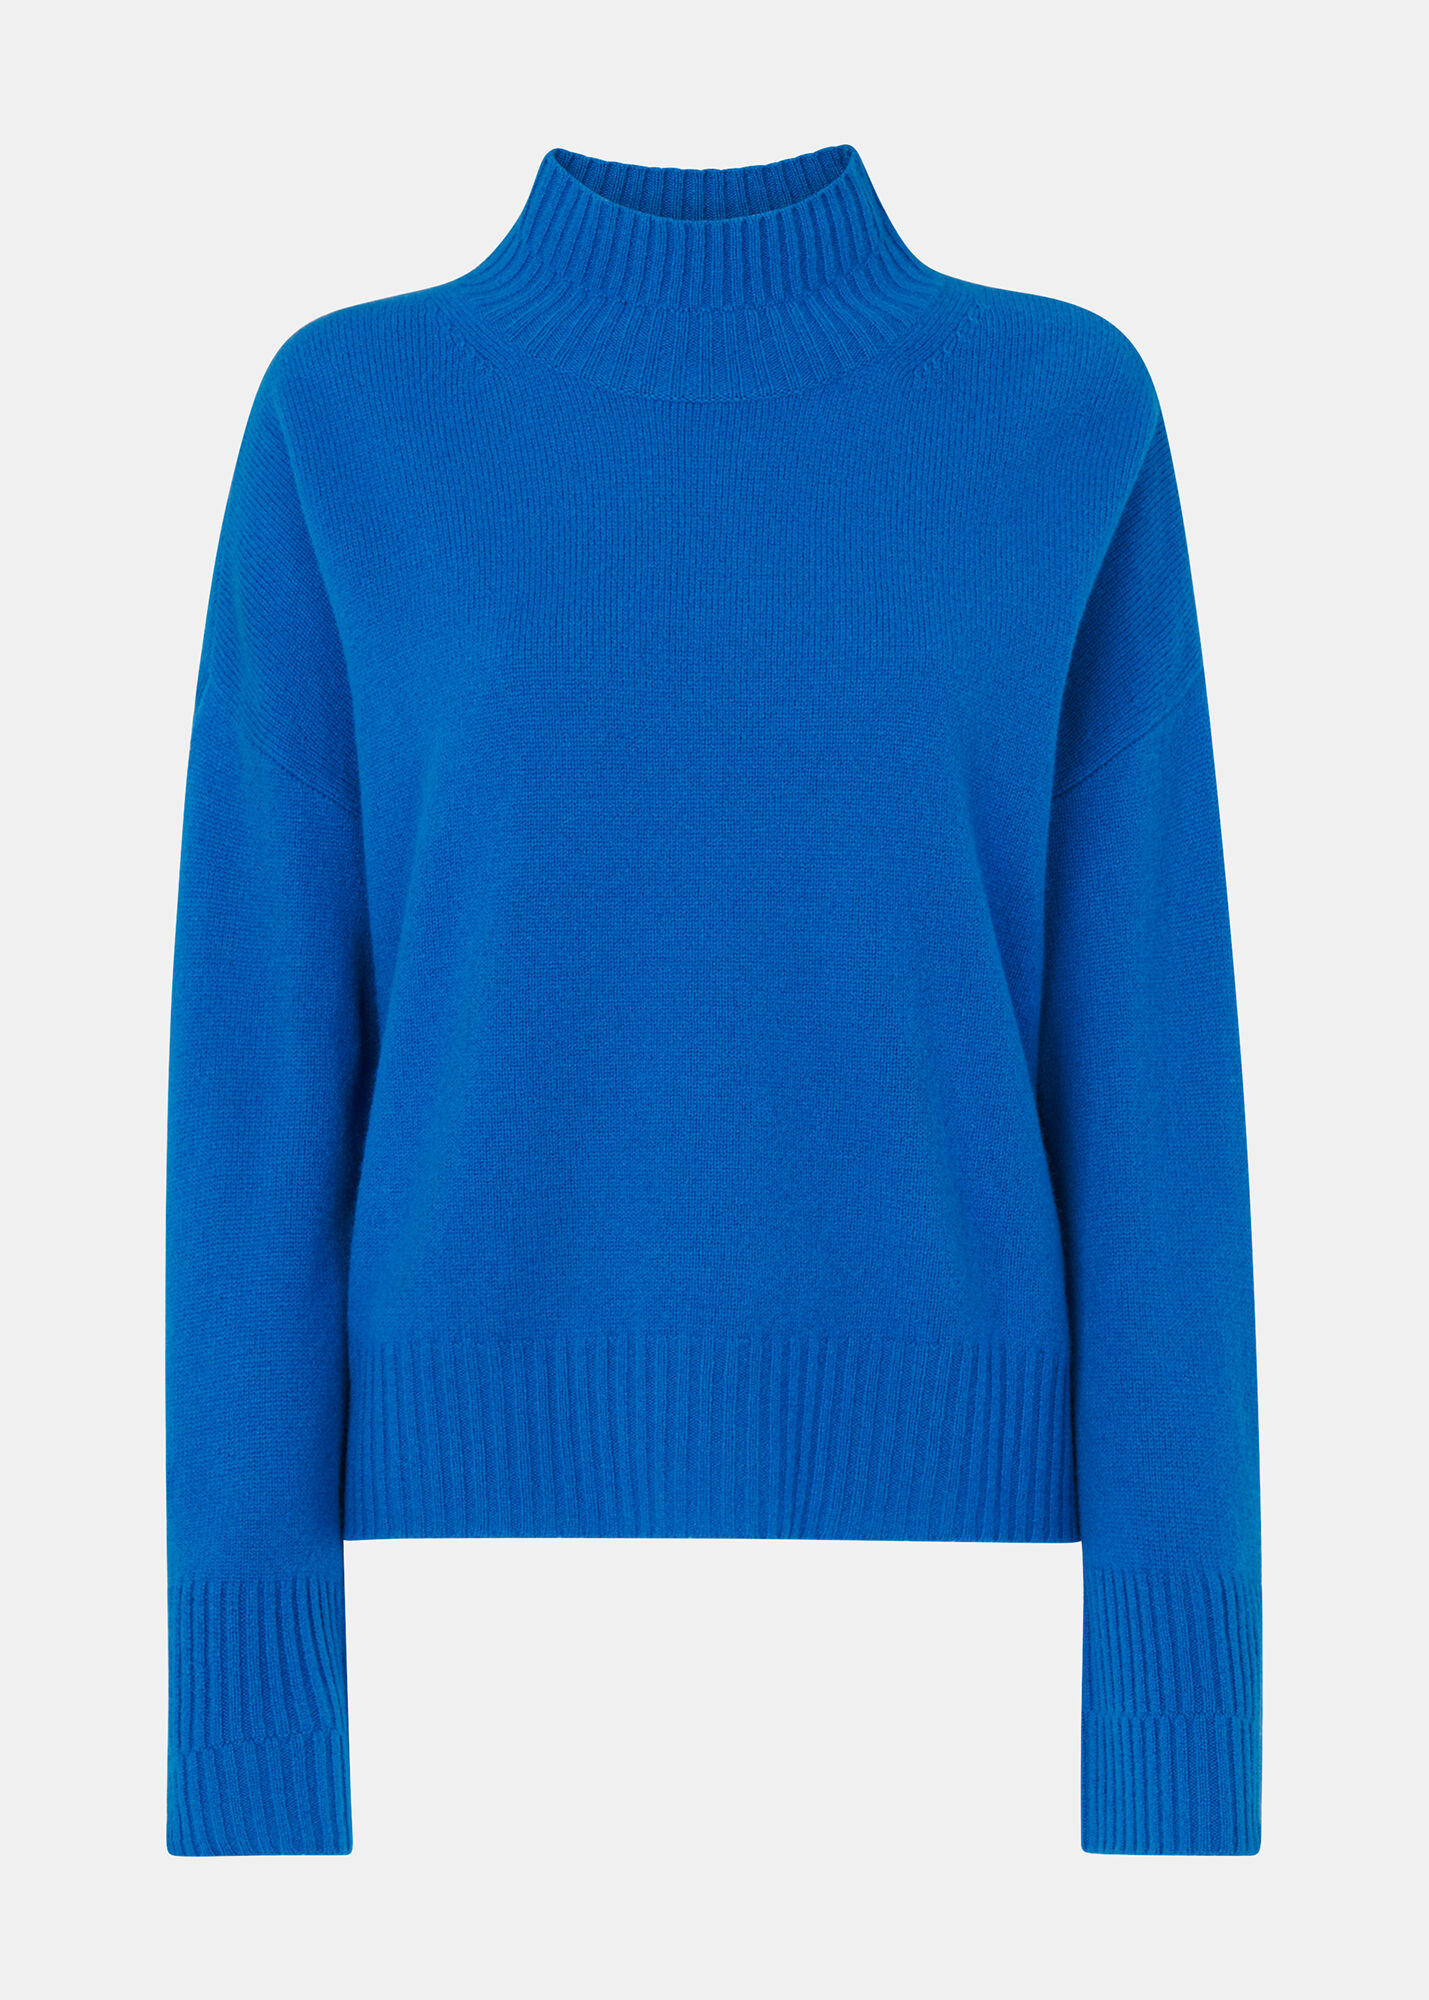 Shop the Blue Wool Funnel Neck Jumper at Whistles